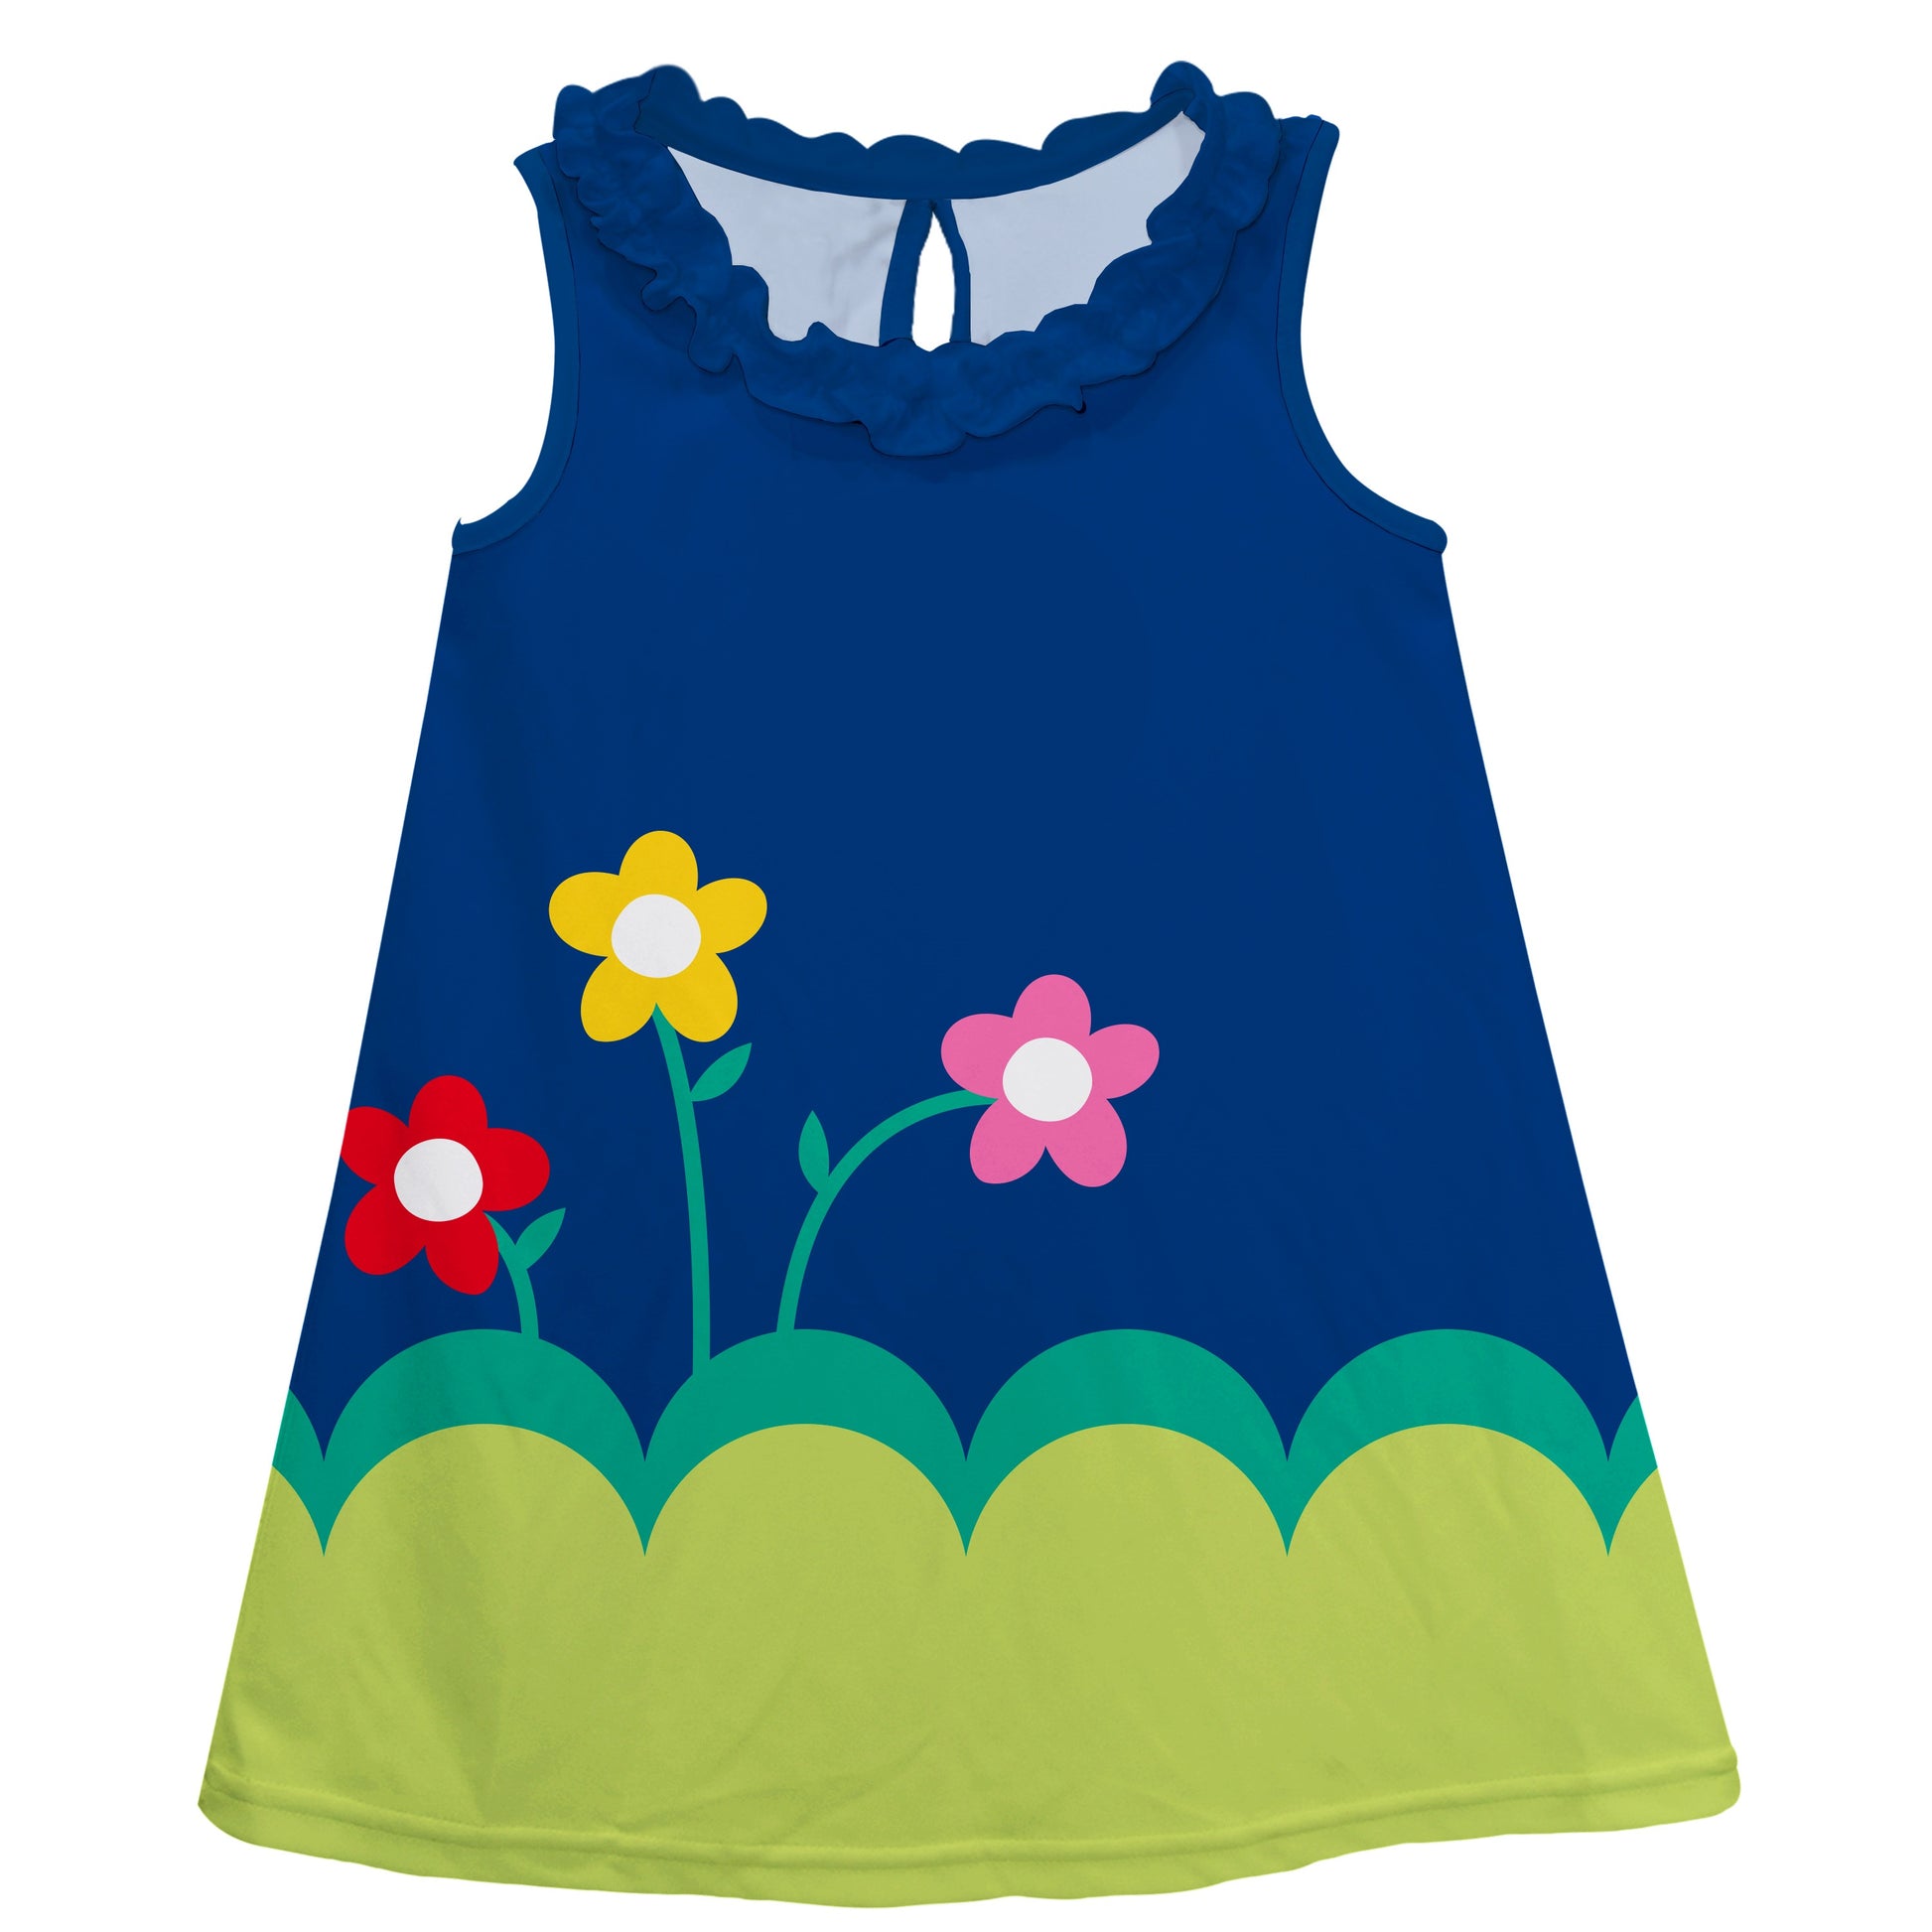 Flowers Personalized Monogram Navy and Green A Line Dress - Wimziy&Co.